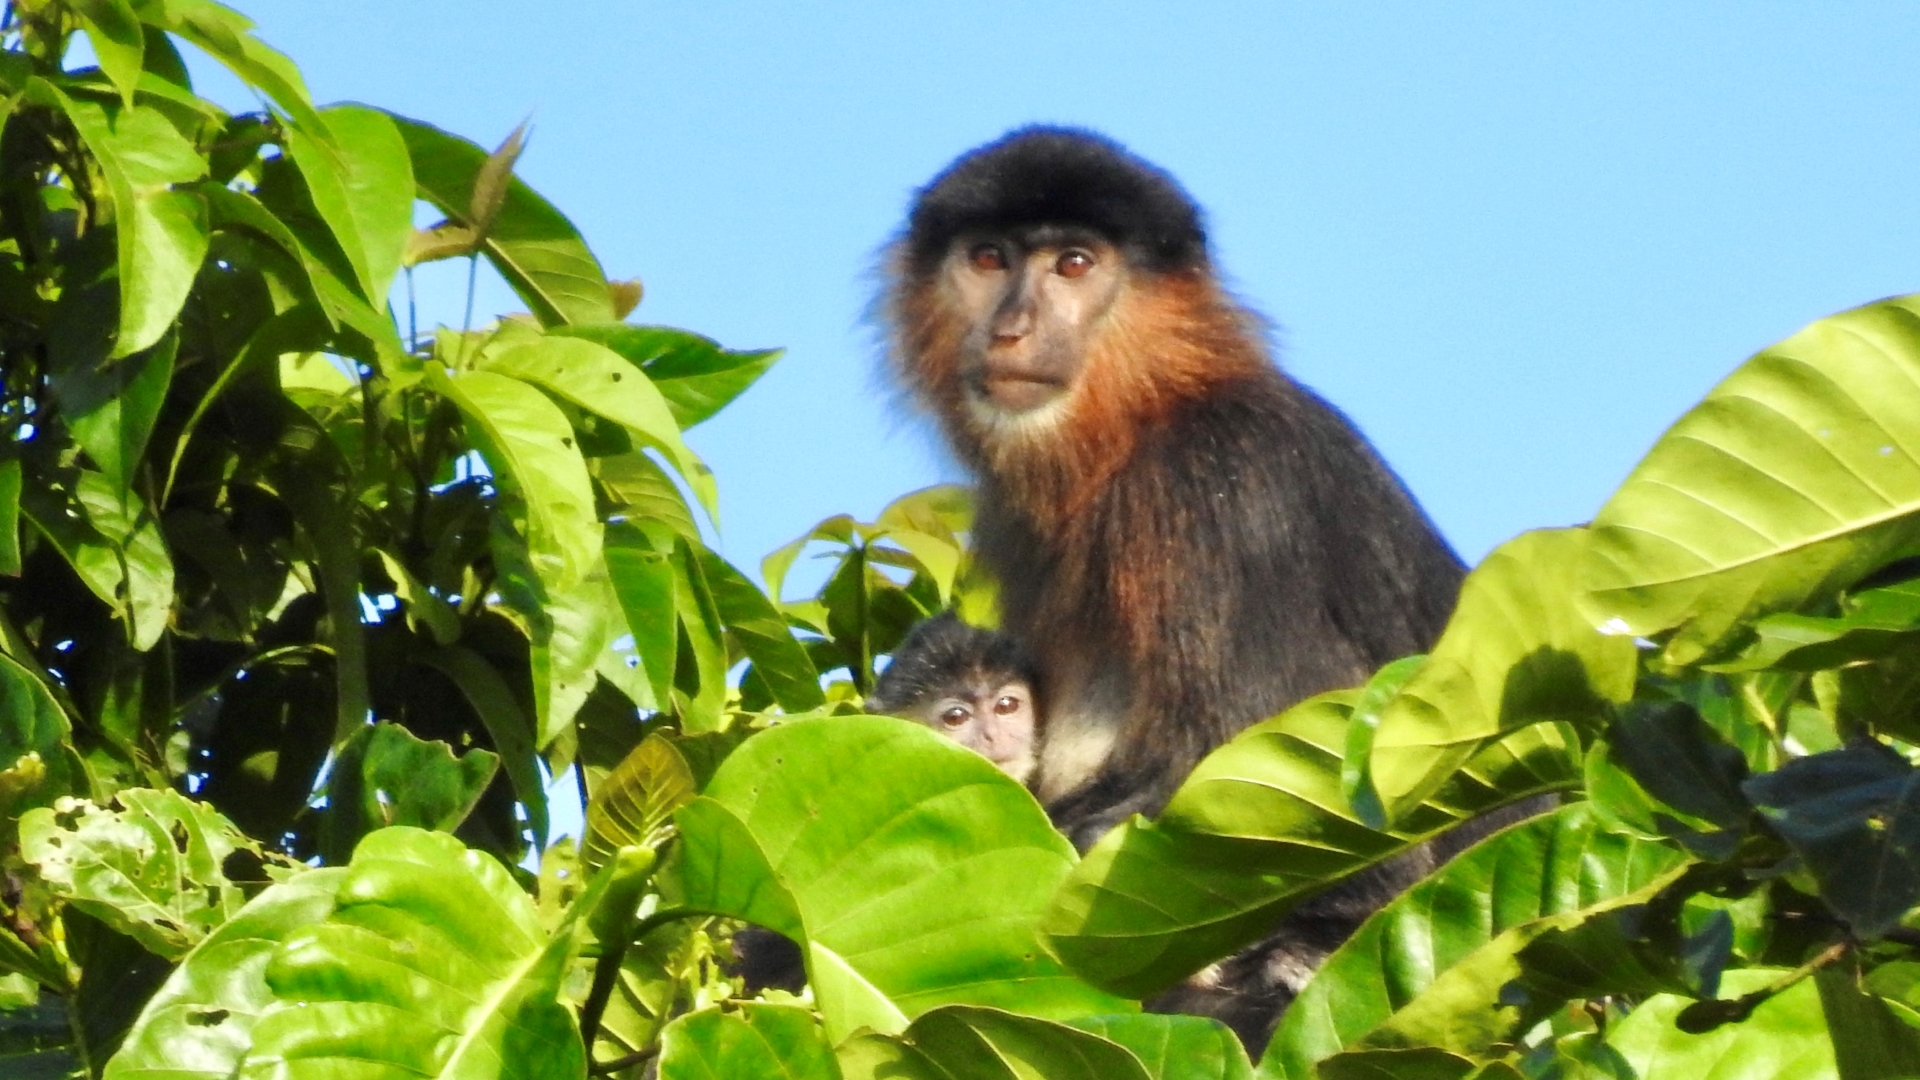 Borneo has a hybrid 'mystery monkey,' and researchers are concerned